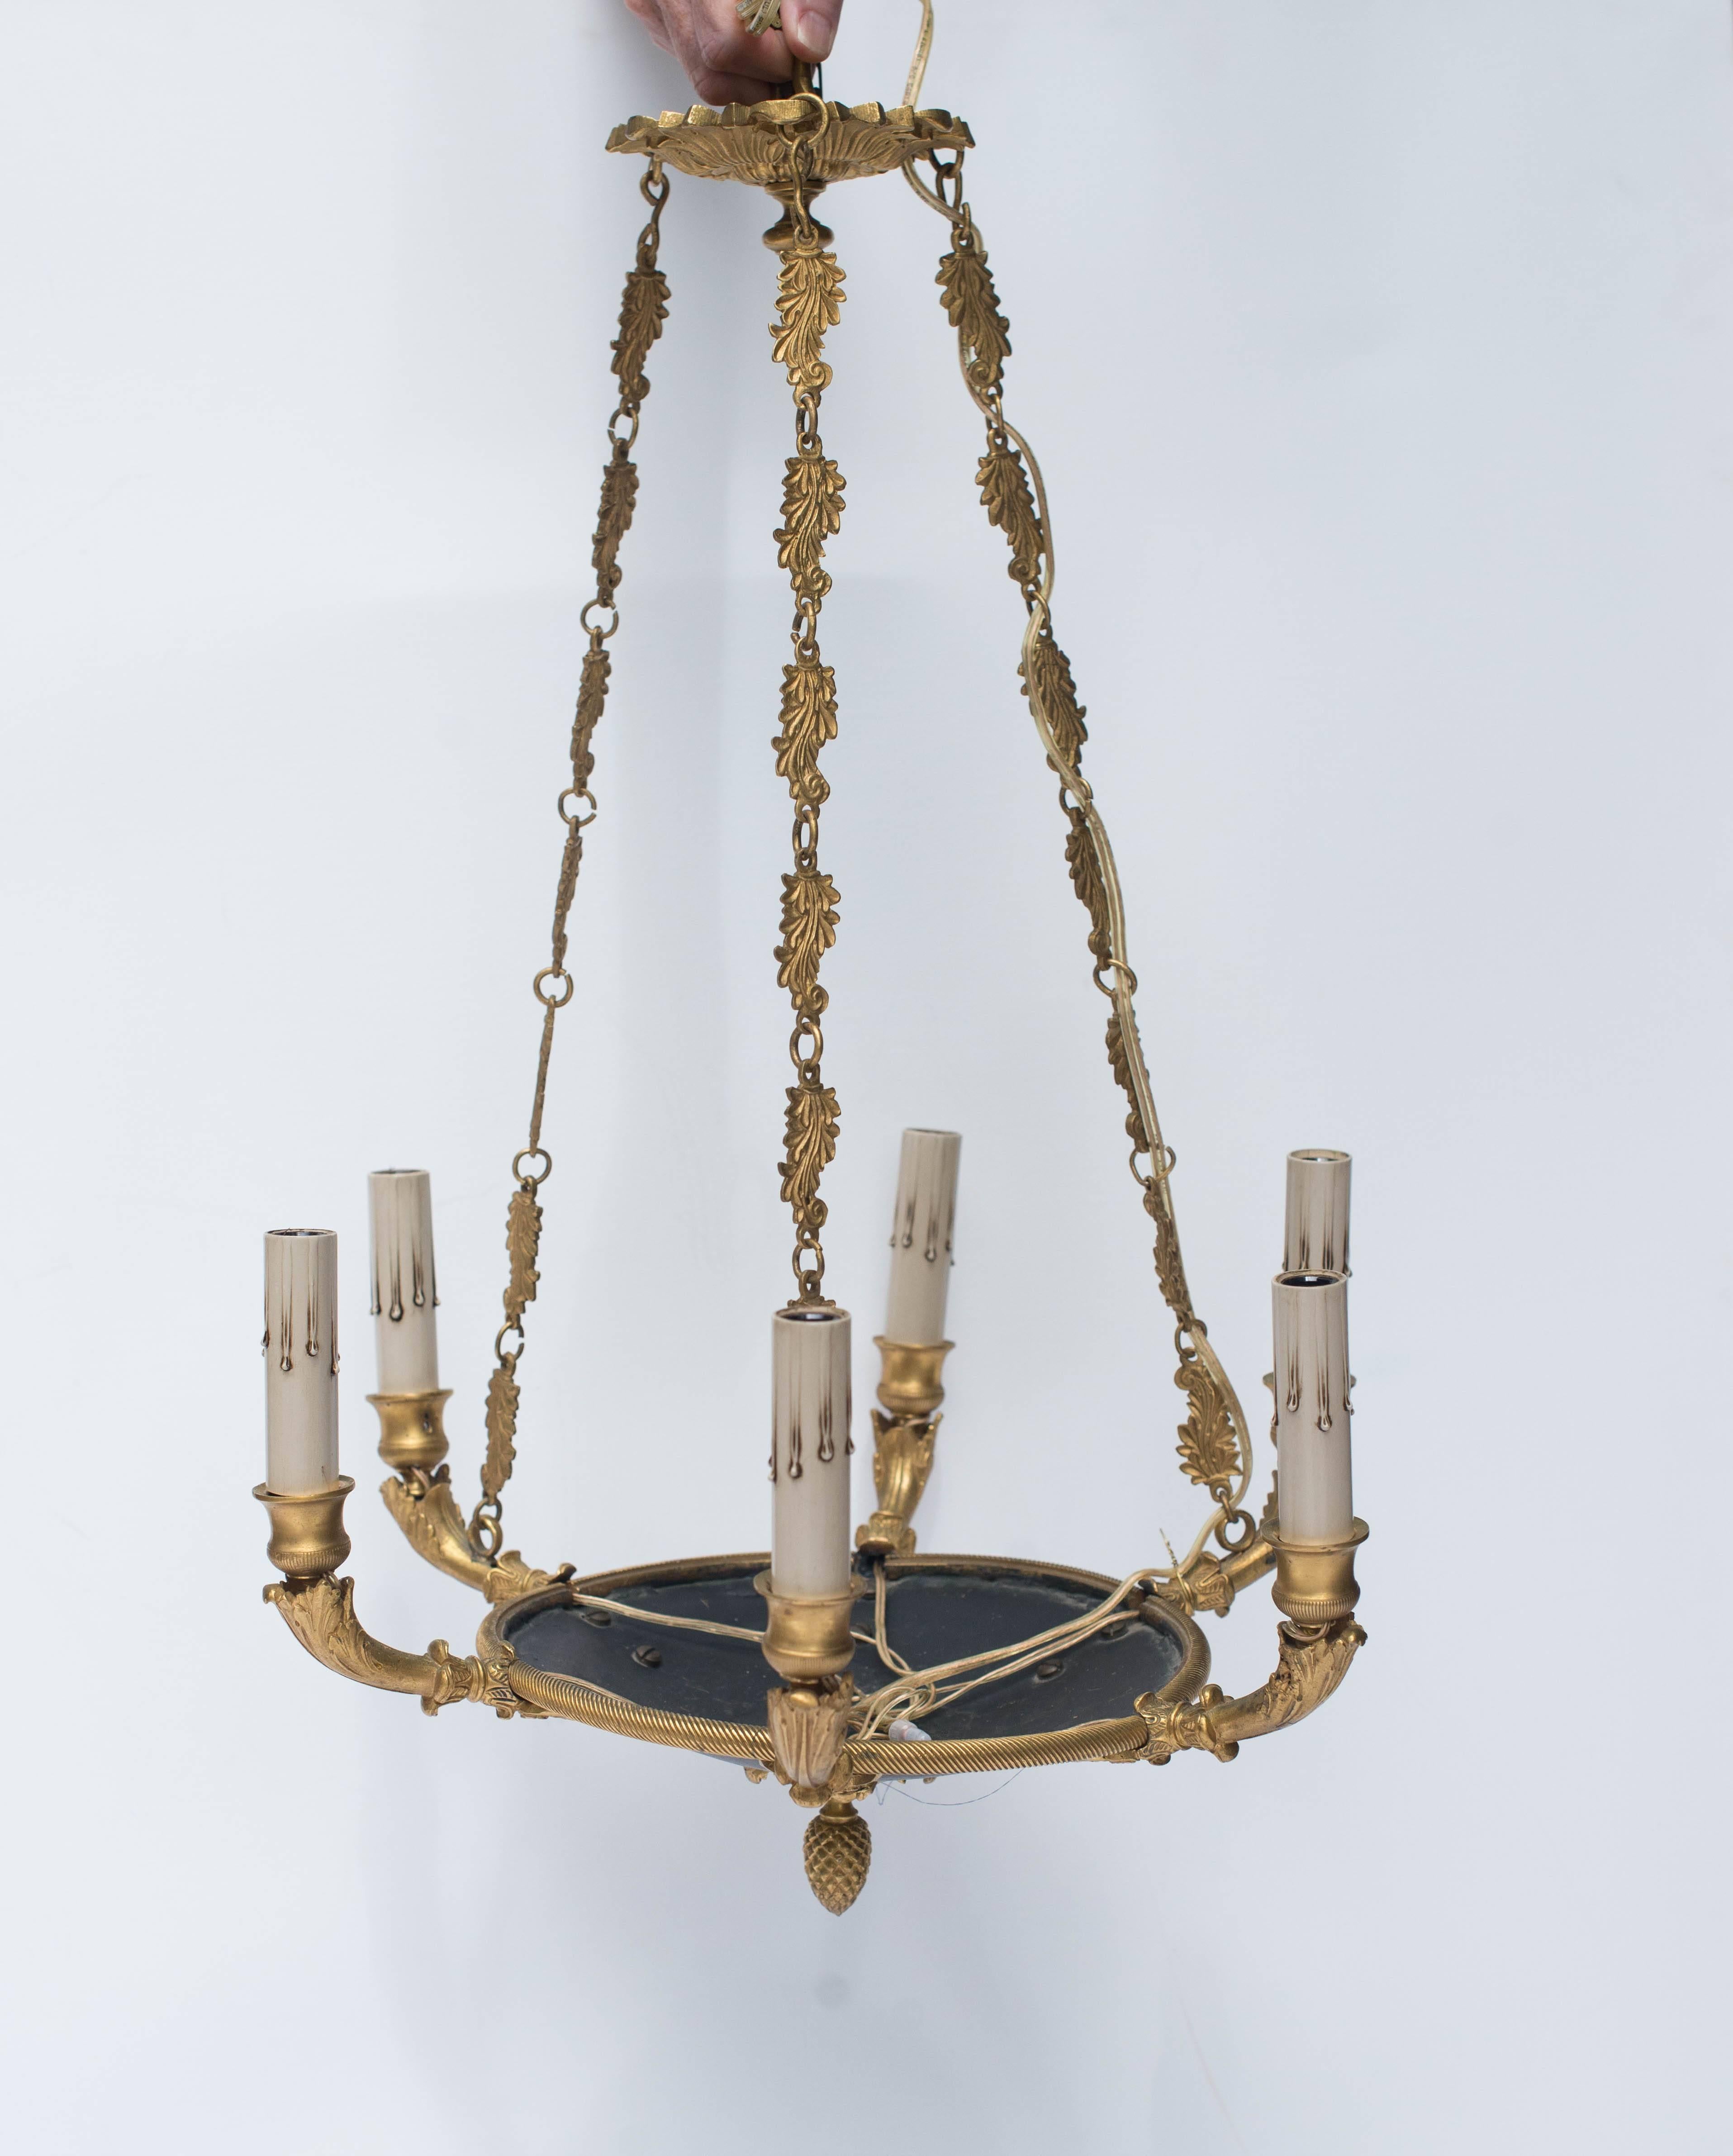 This early 20th century French Empire style chandelier is bronze and features six arms with a black tole bowl. The decorative chain is original ut the chandelier has been newly rewired for American use.